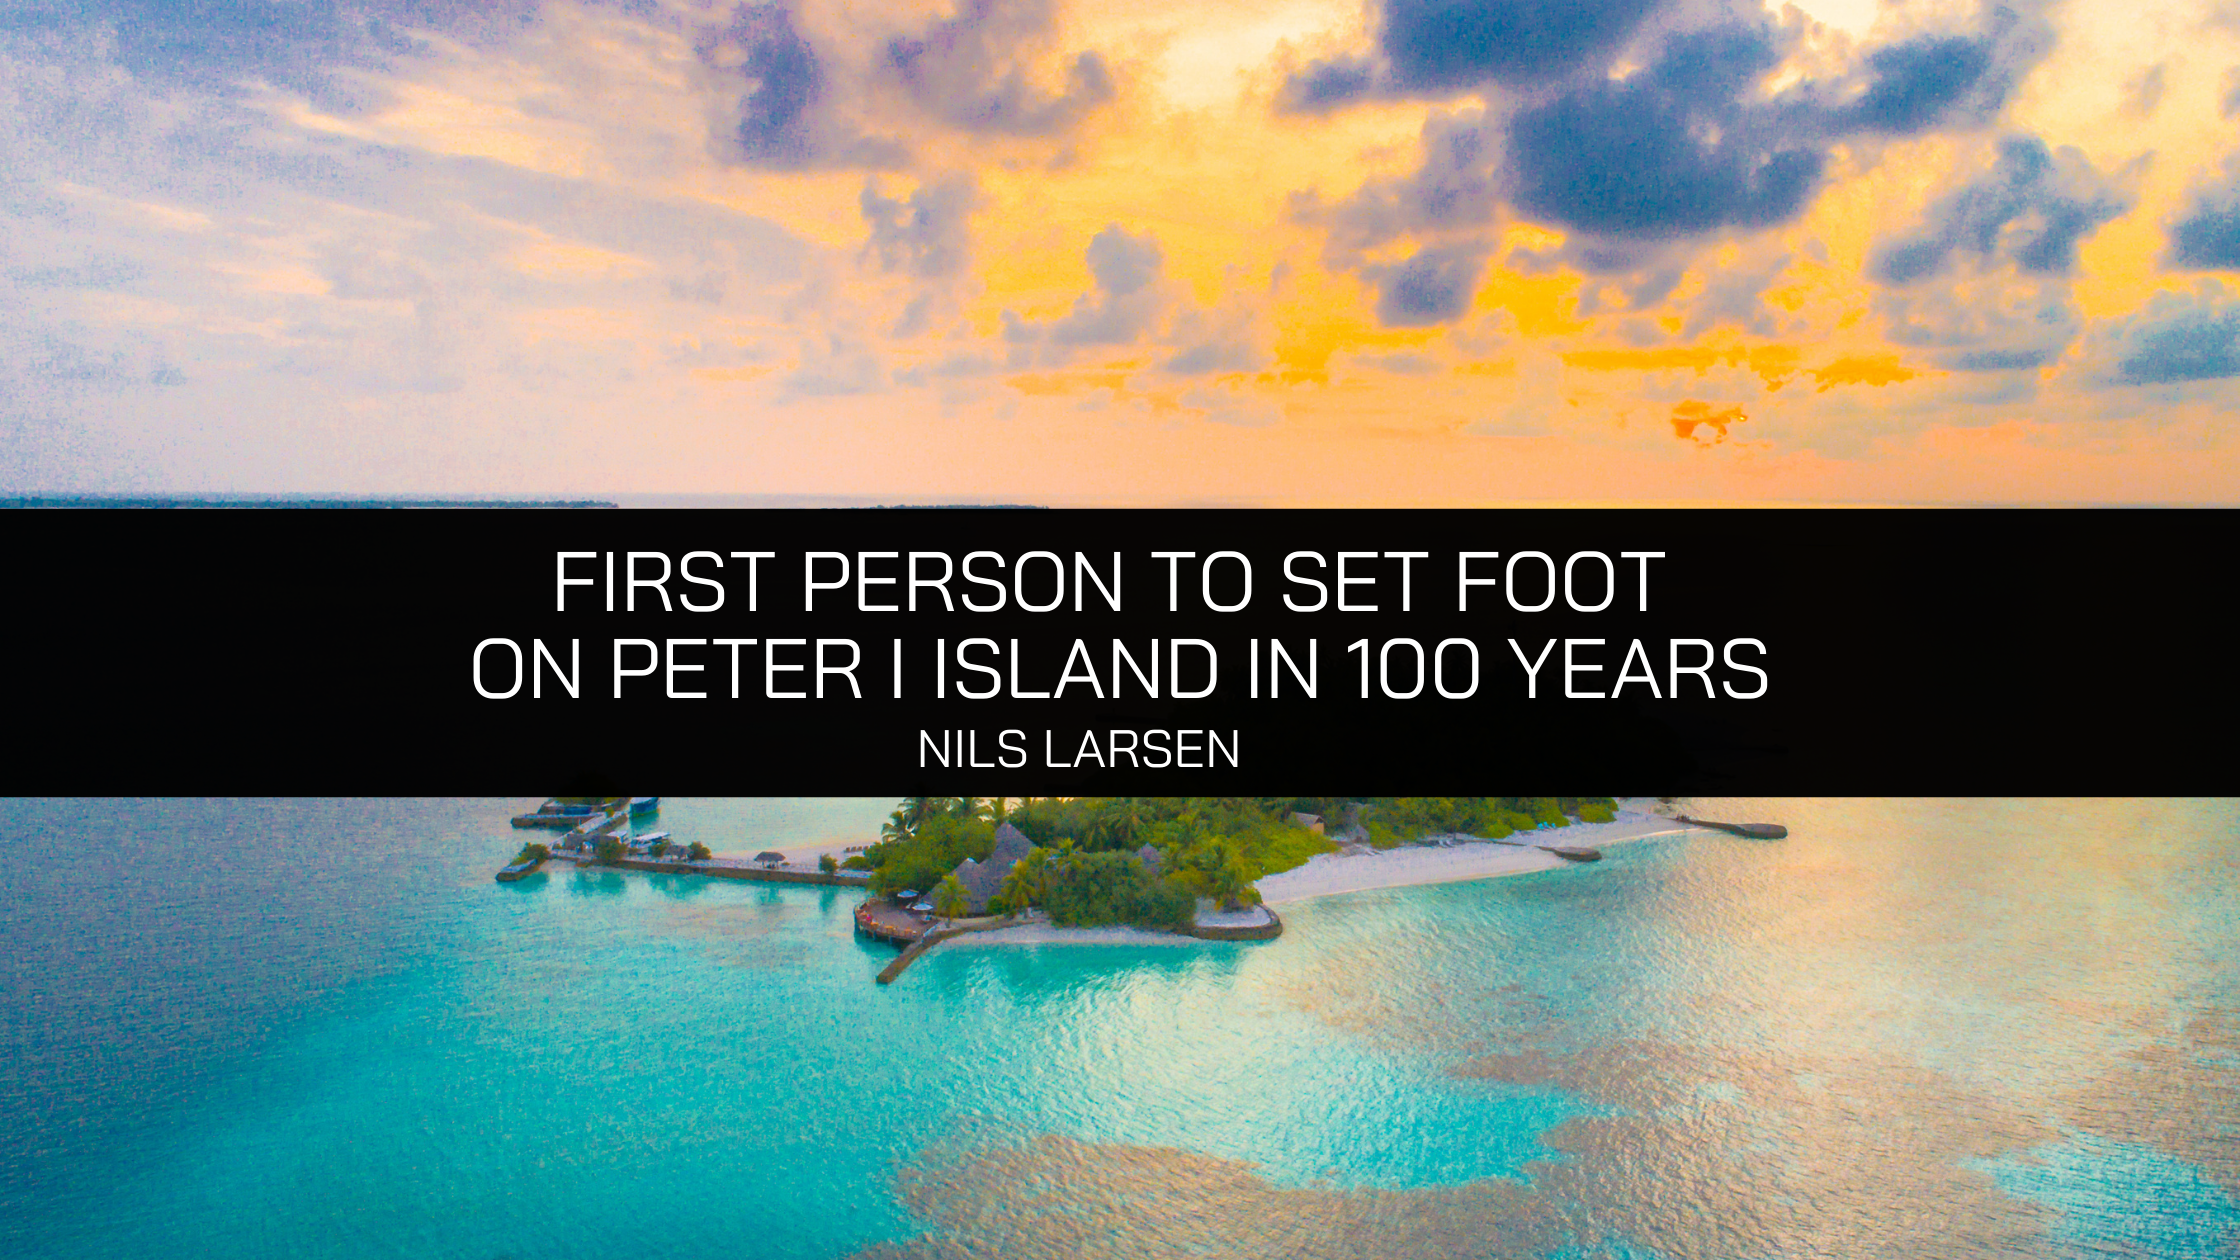 Norwegian Sea Captain Nils Larsen was the First Person to Set Foot on Peter I Island in 100 Years